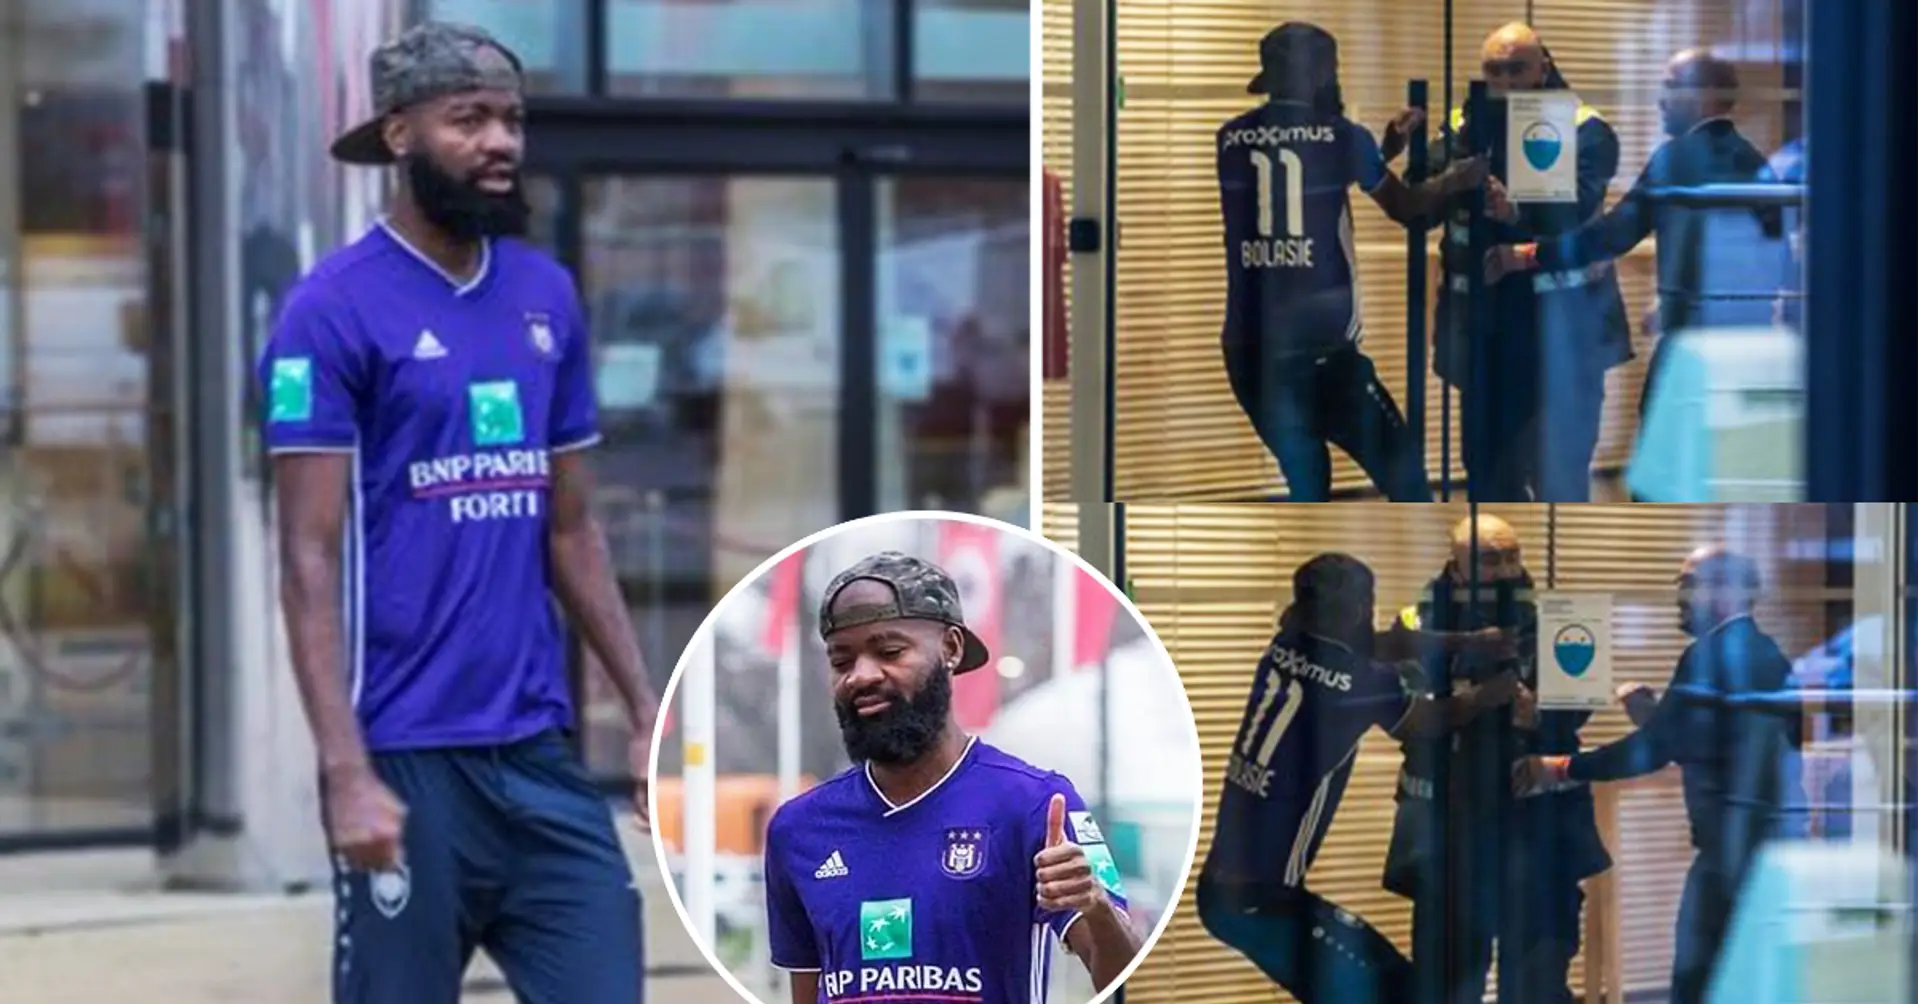 Belgian player tries to force move, arrives to training in rival clubs shirt